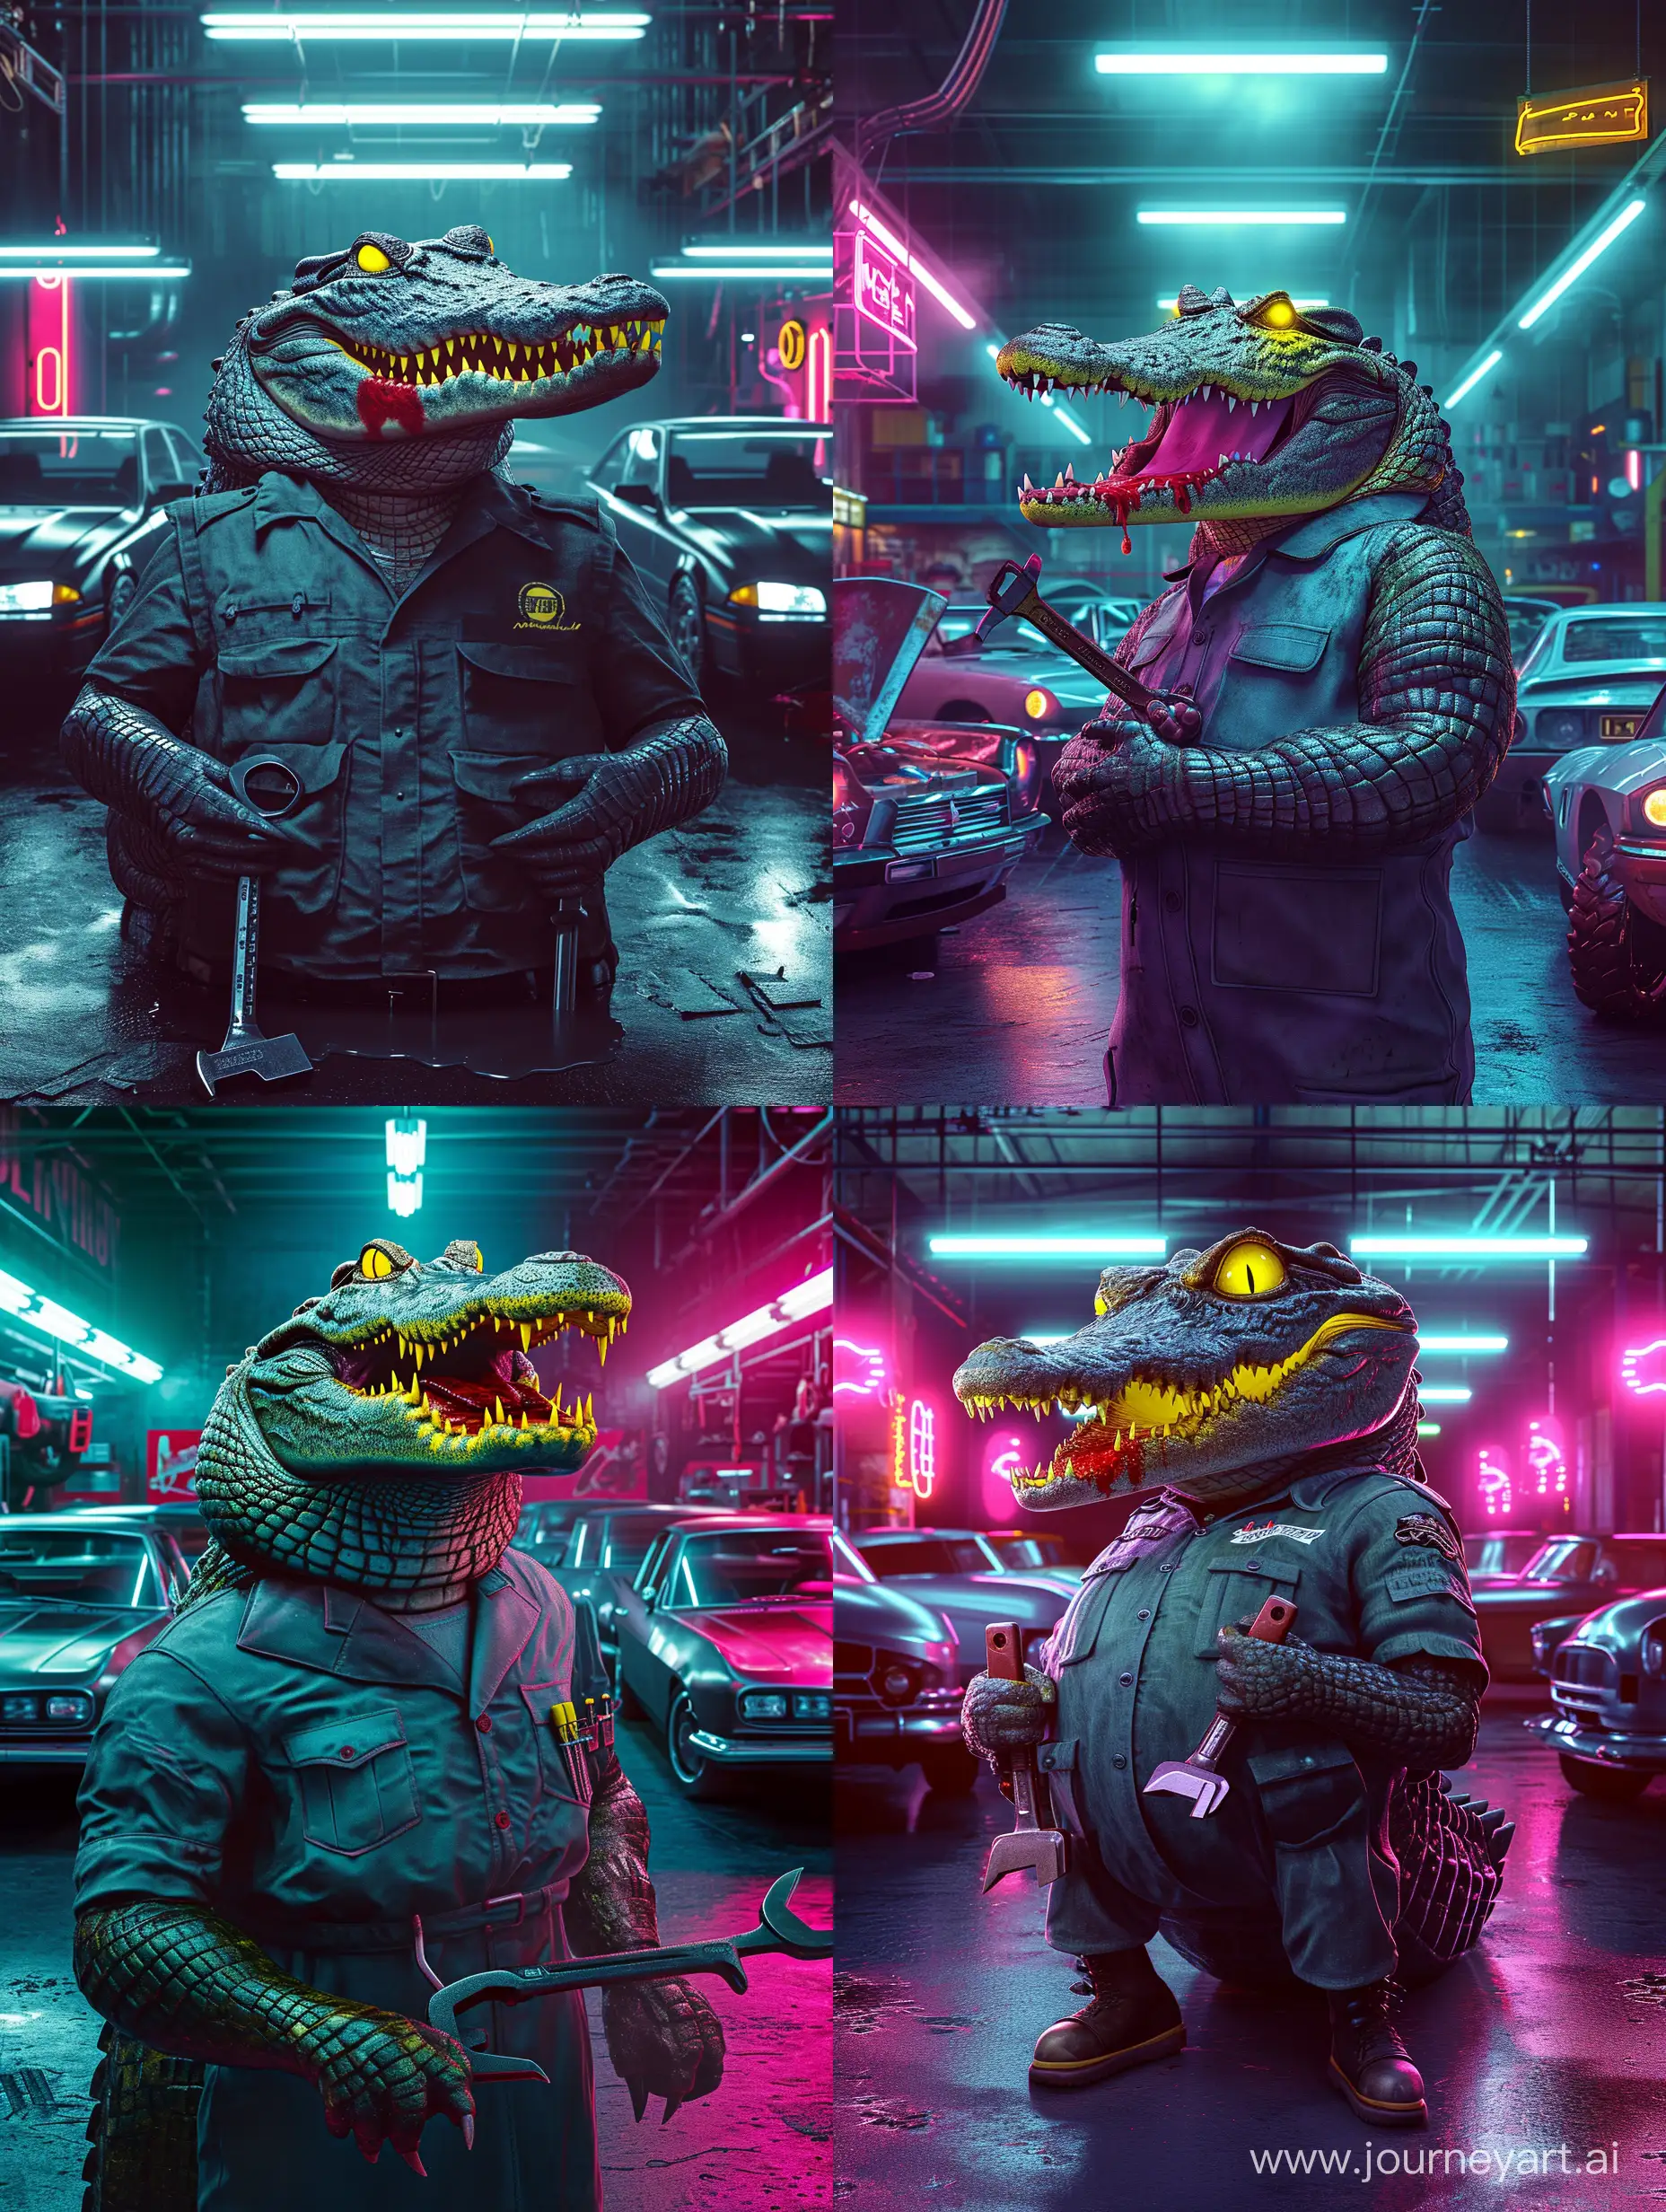 Ultra realistic,a crocodile with an evil smile, yellow evil eyes, a stain of blood on the crocodile's mouth, wearing a workshop uniform, standing while holding a wrench,the background is inside of a workshop,six cars in the workshop, neon lighting, sony alpha 1